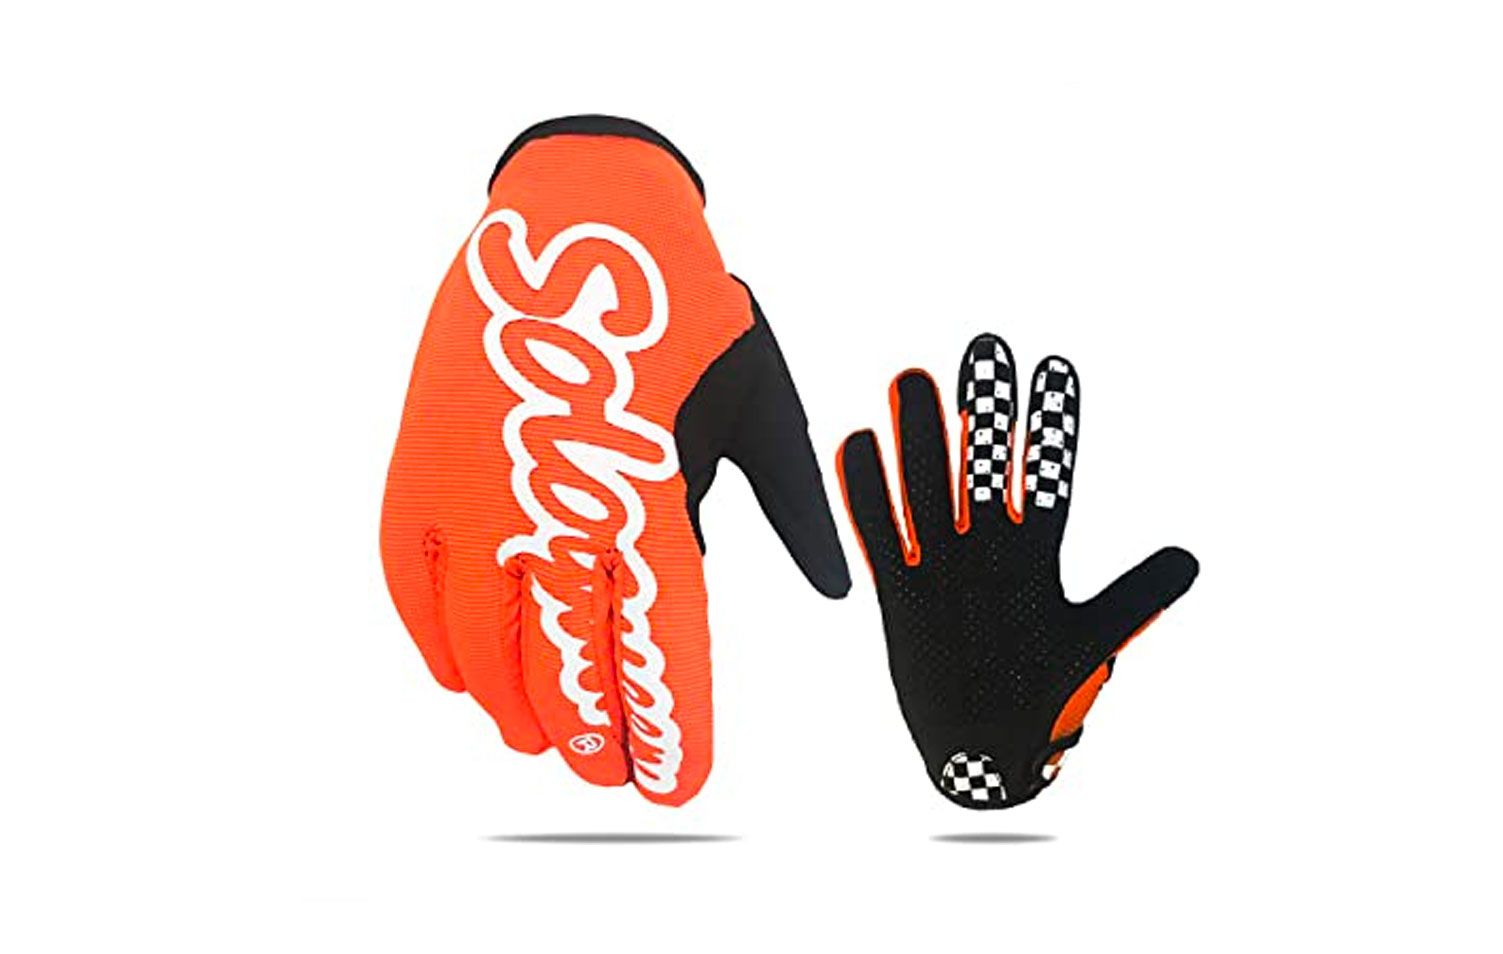 Solo Queen Sim Racing Gloves product image of an orange and black pair of gloves with white branding.